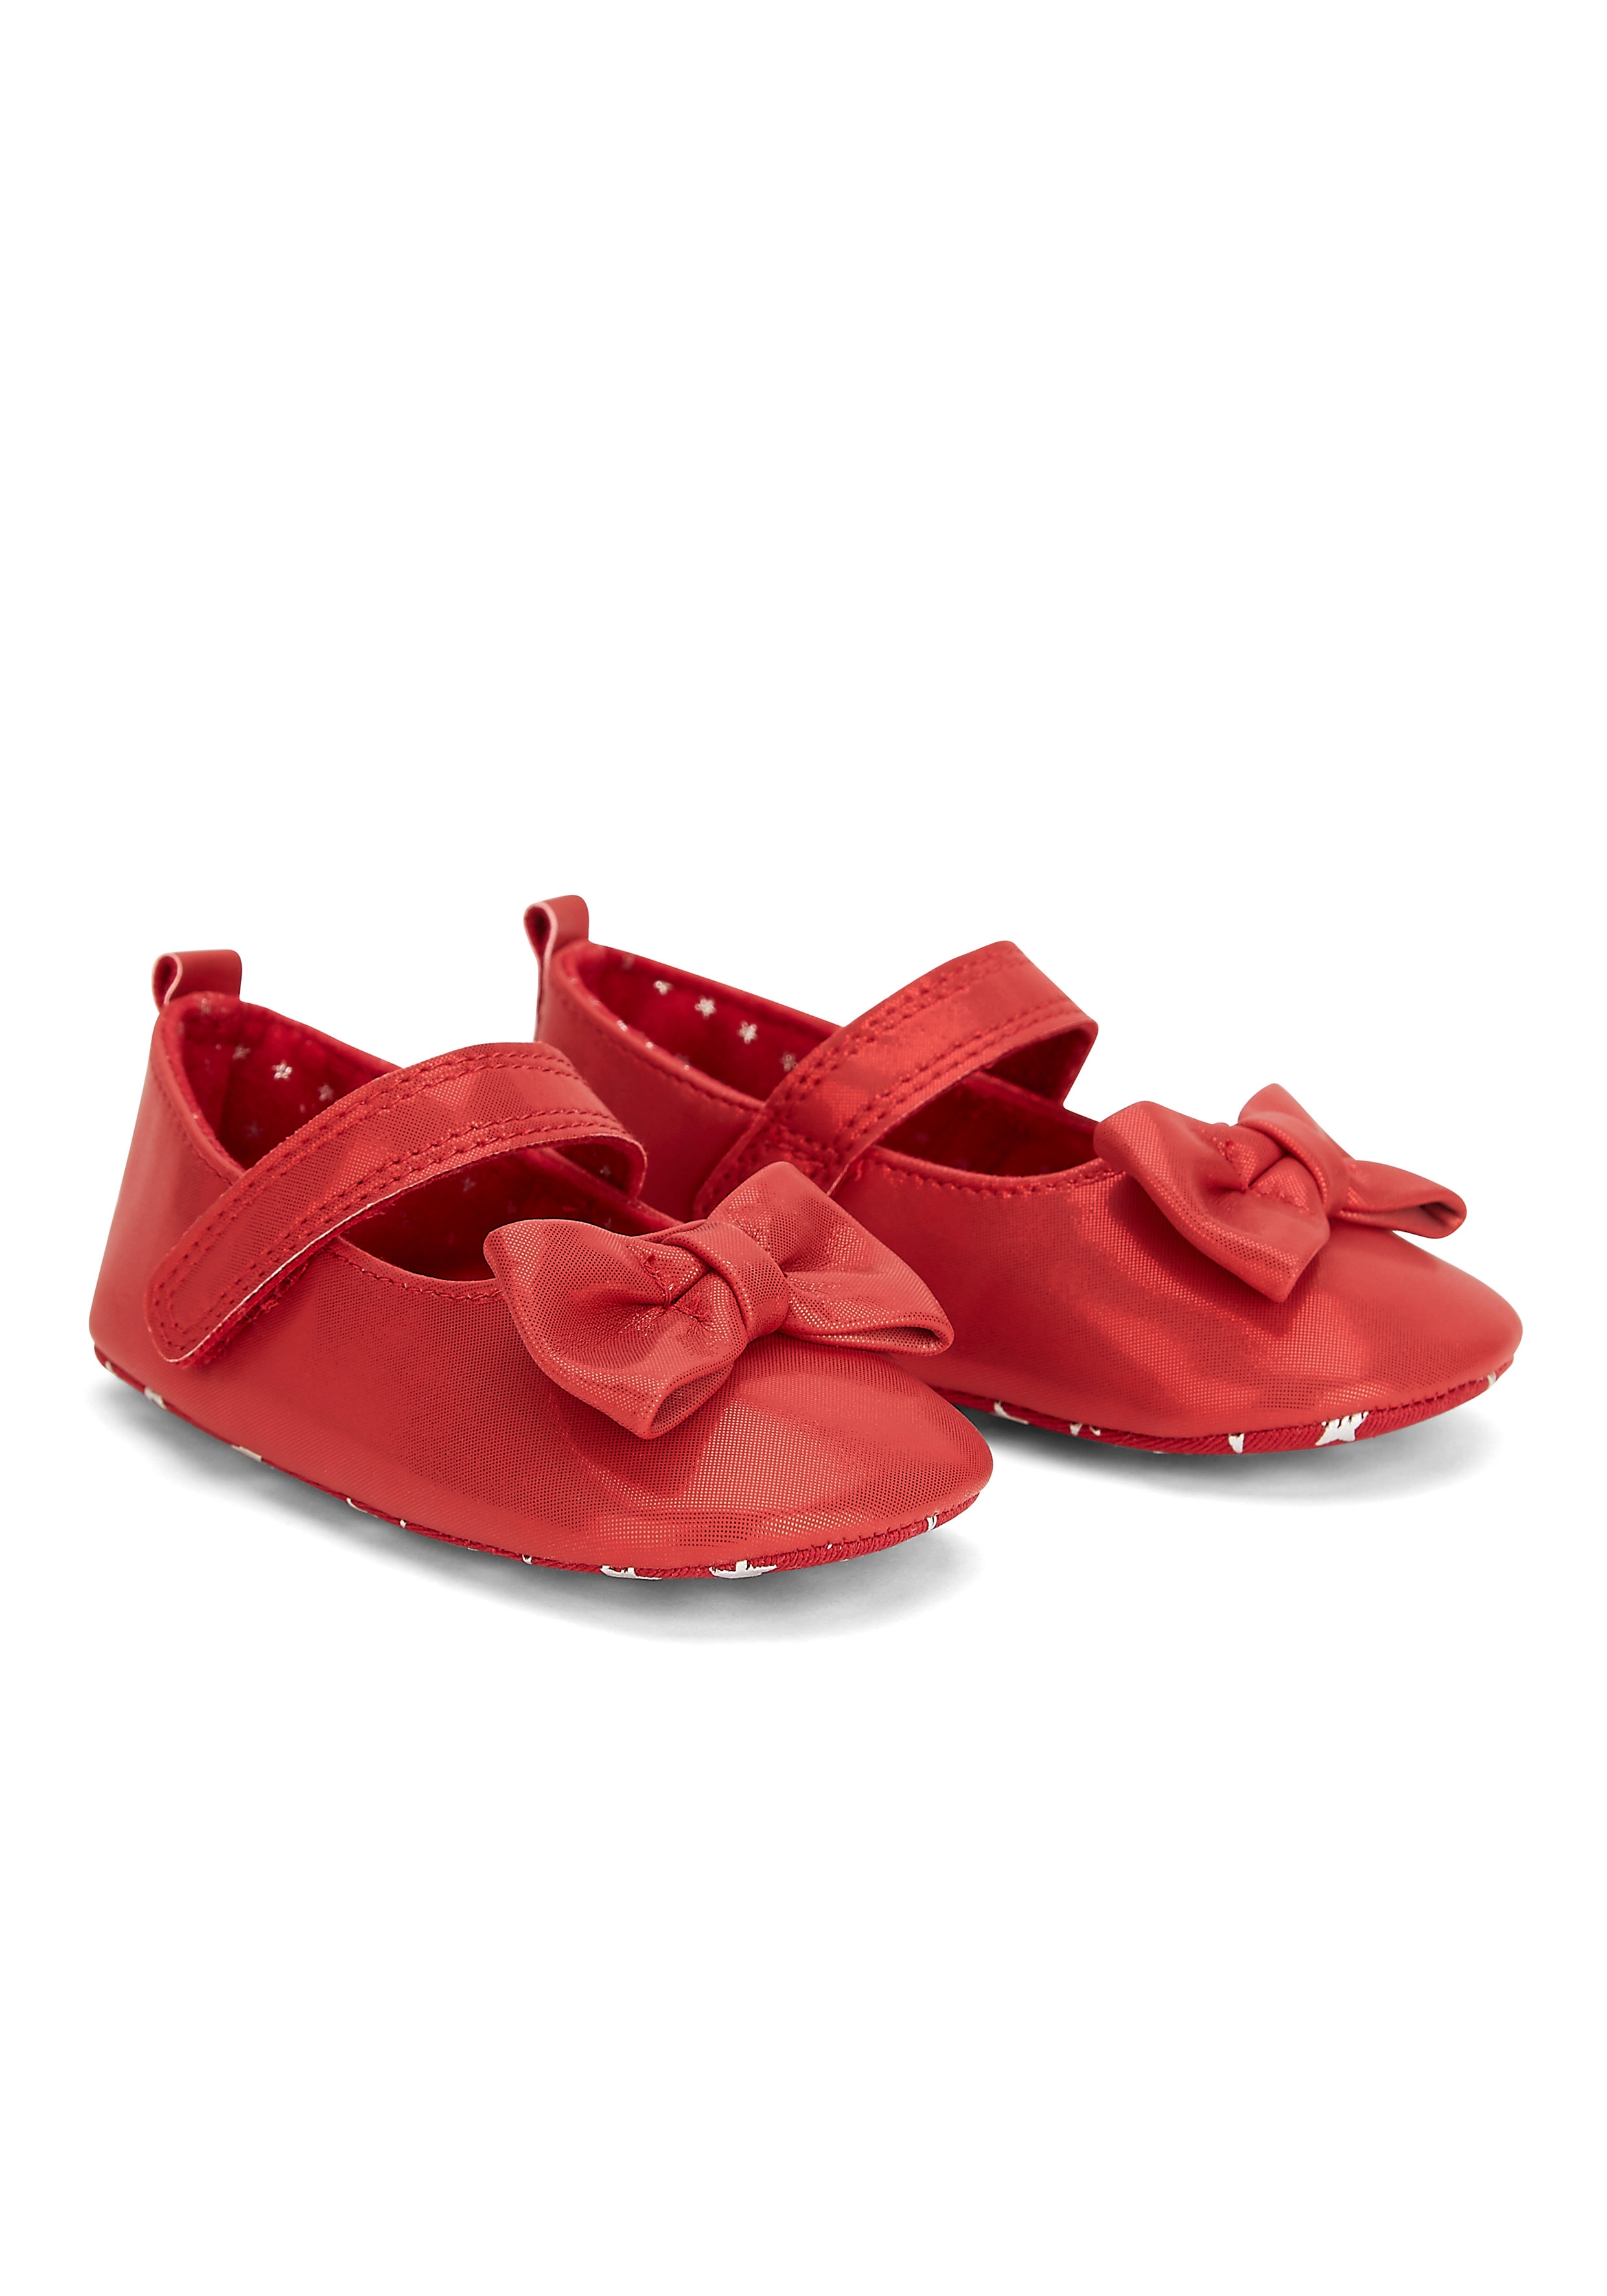 Mothercare | Girls Bow Party Shoes - Red